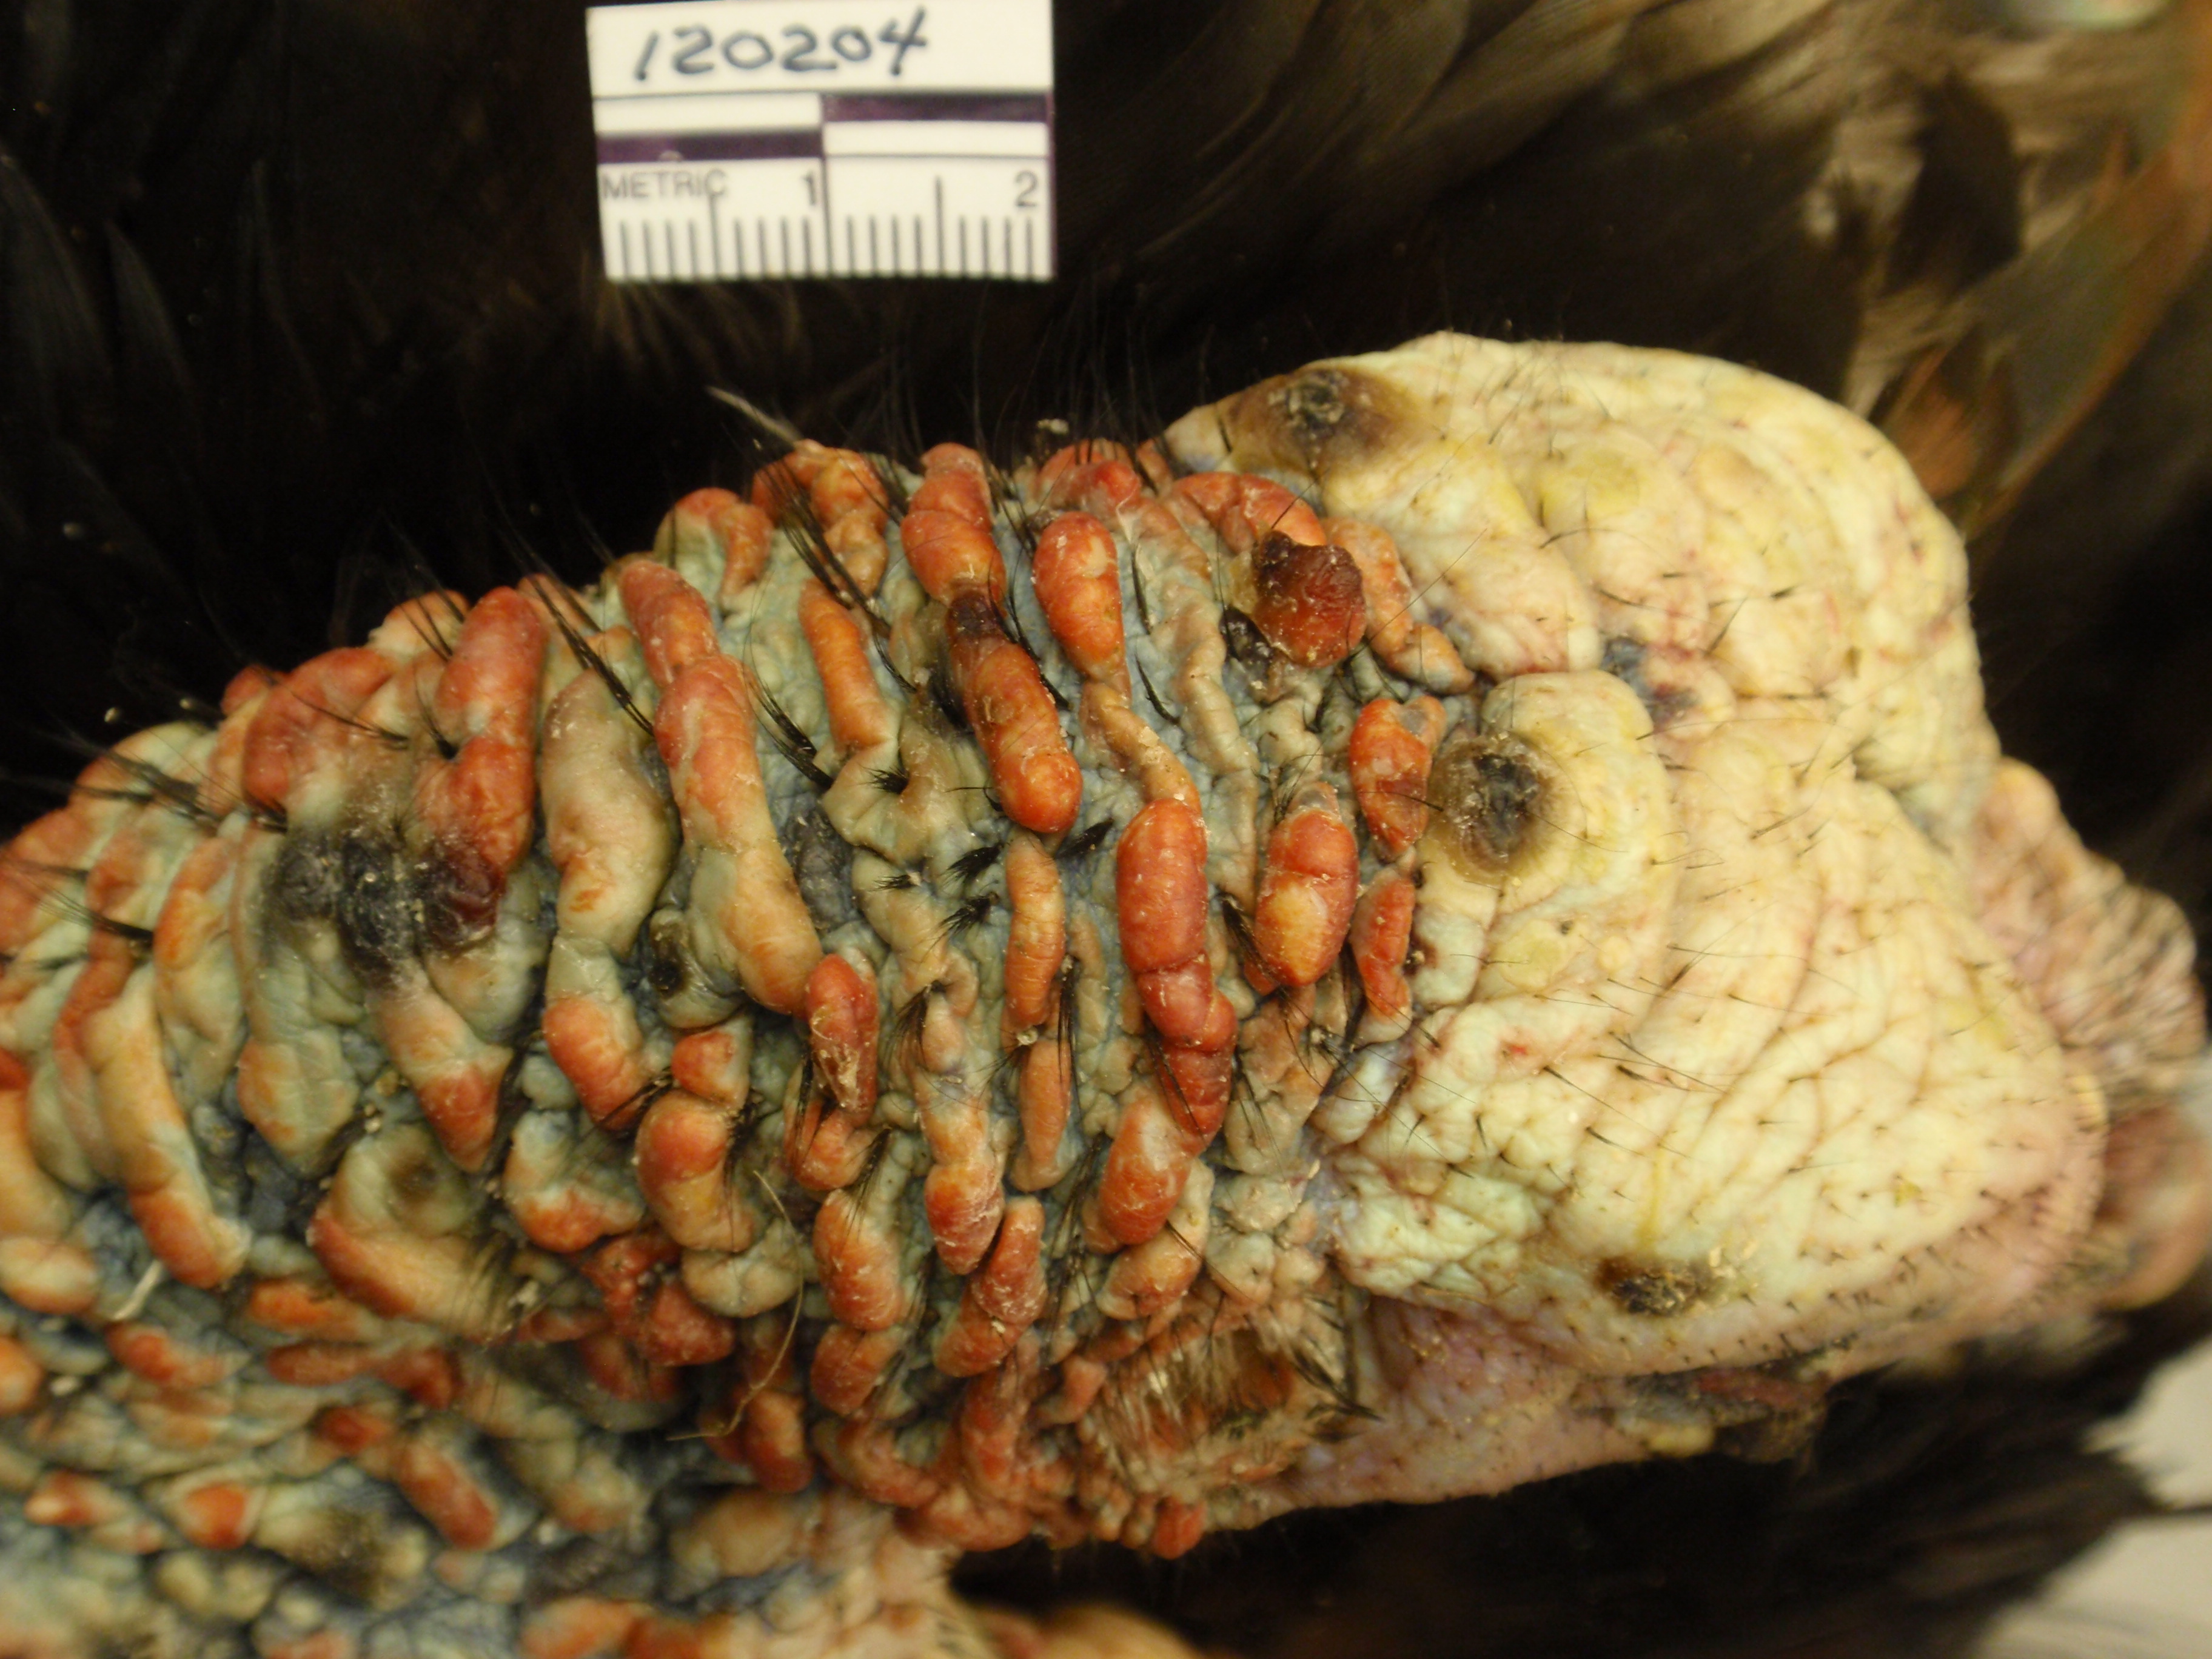 back of turkey head and neck with significant LPDV infection